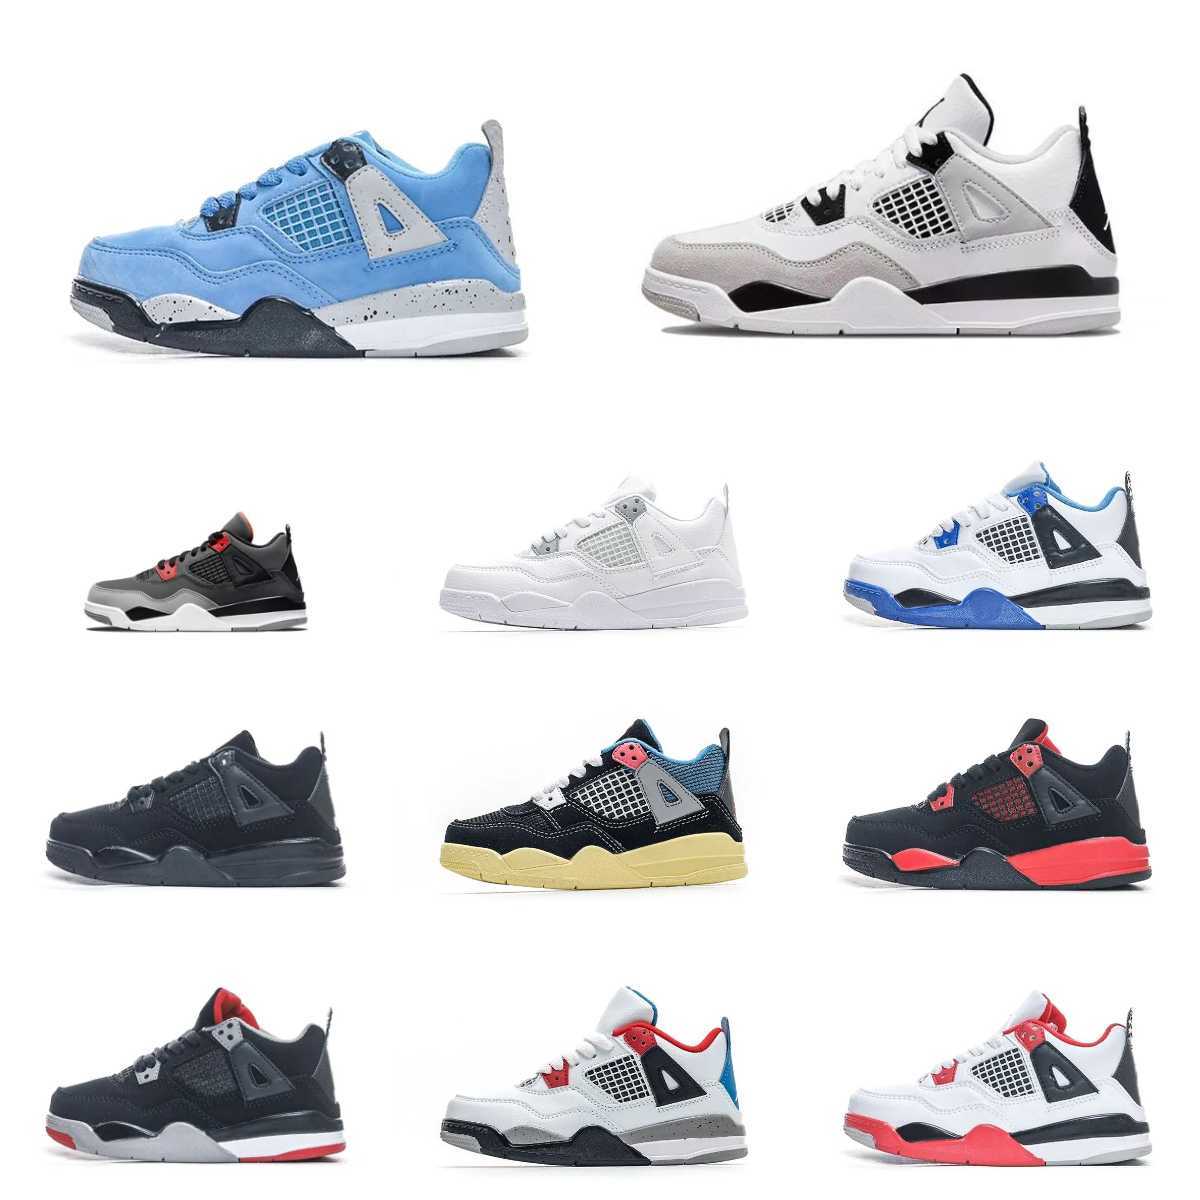 

Jumpman 4S Kids Military Black Sports Basketball Shoes Baby Red Thunder Union 4 Black Cat All White Pink Pure Money Trainers Girl Retros What The Infrared Sneakers S88, Please contact us